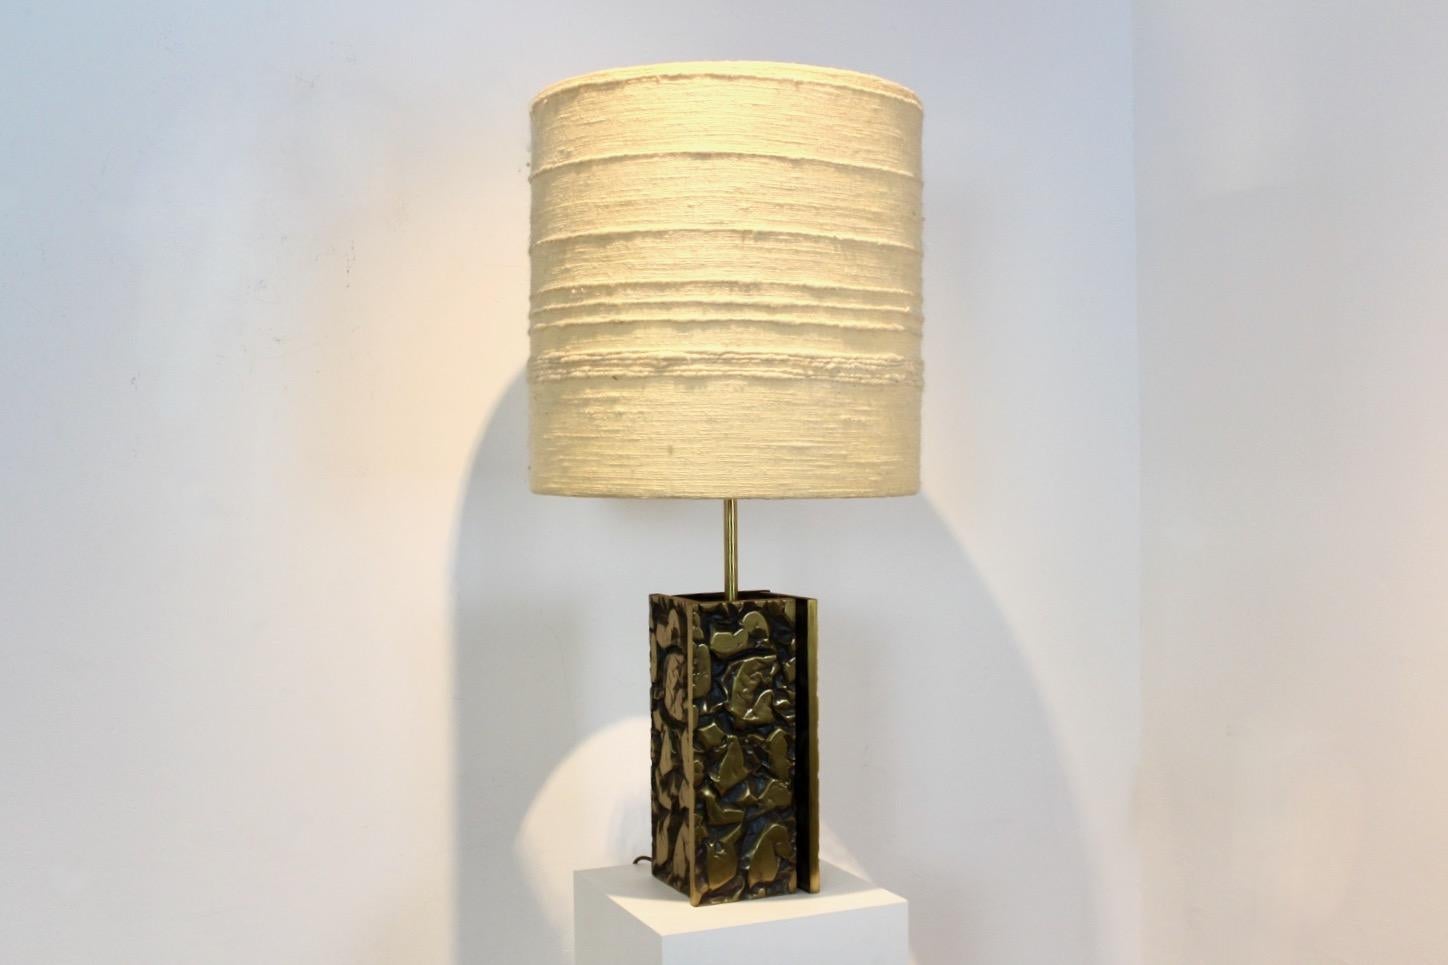 Stunning Brutalist Metal Sculptured Table Lamp with Raw Woolen Structured Shade For Sale 8